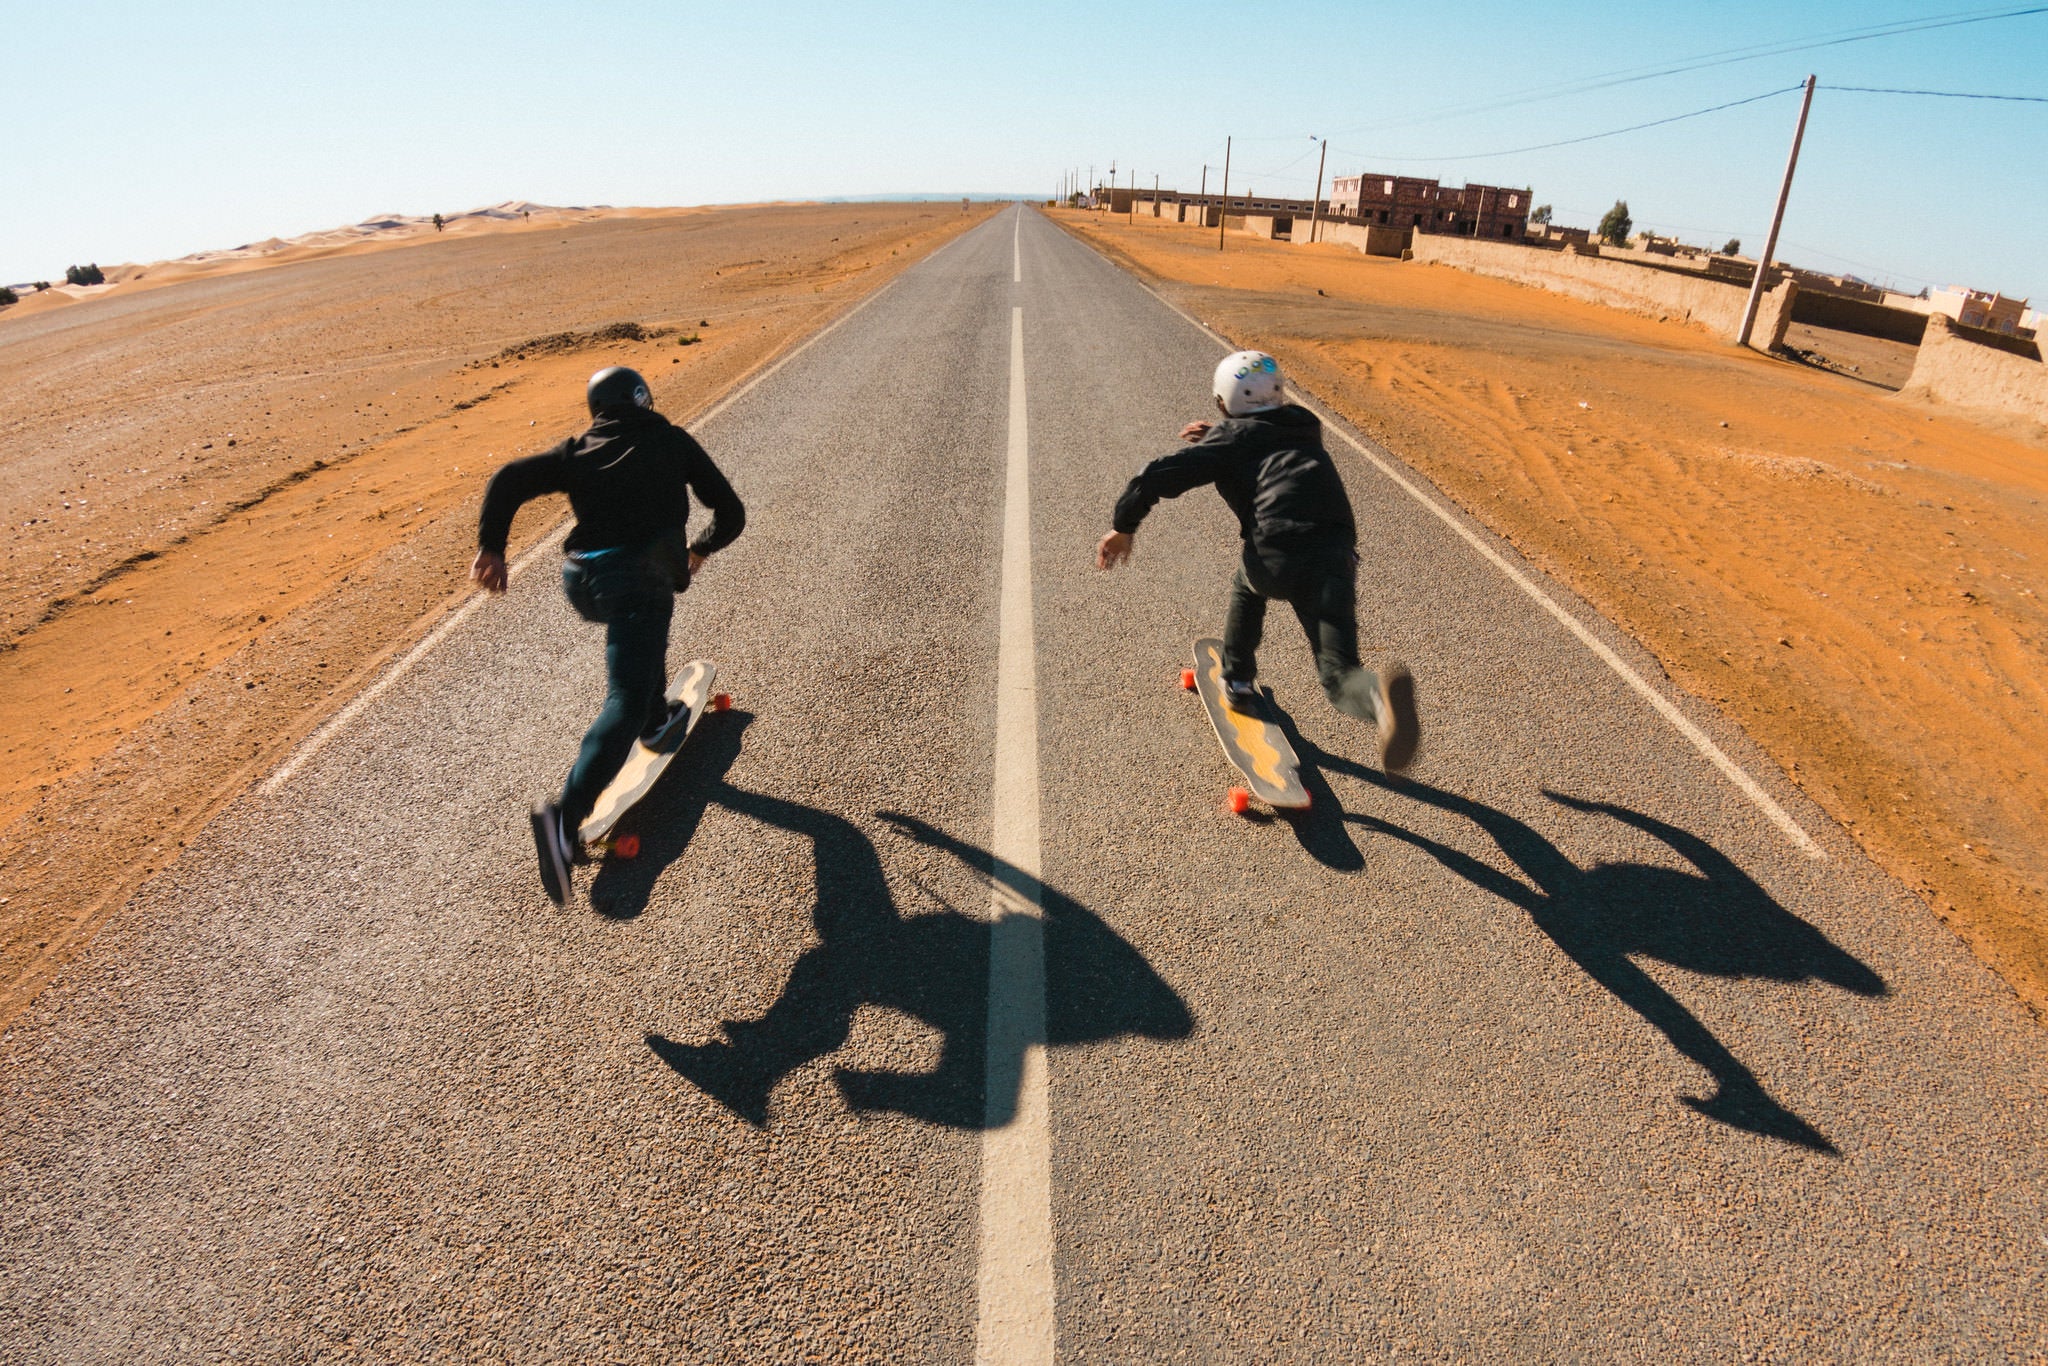 Longboards are primarily for transportation.